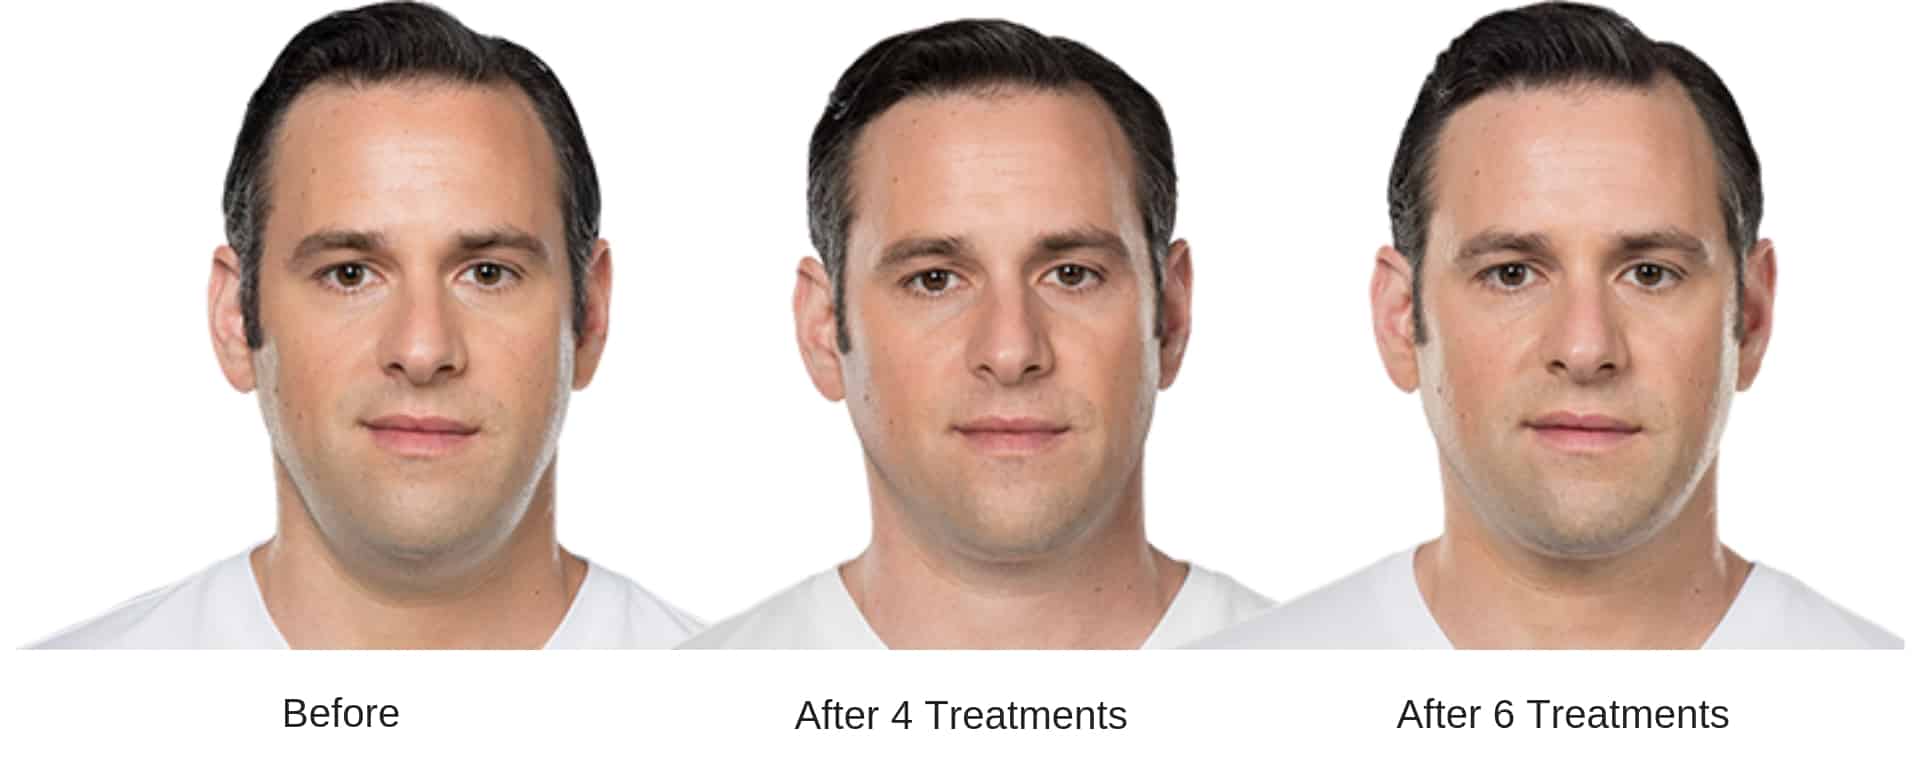 Man's before and after Kybella treatment results.